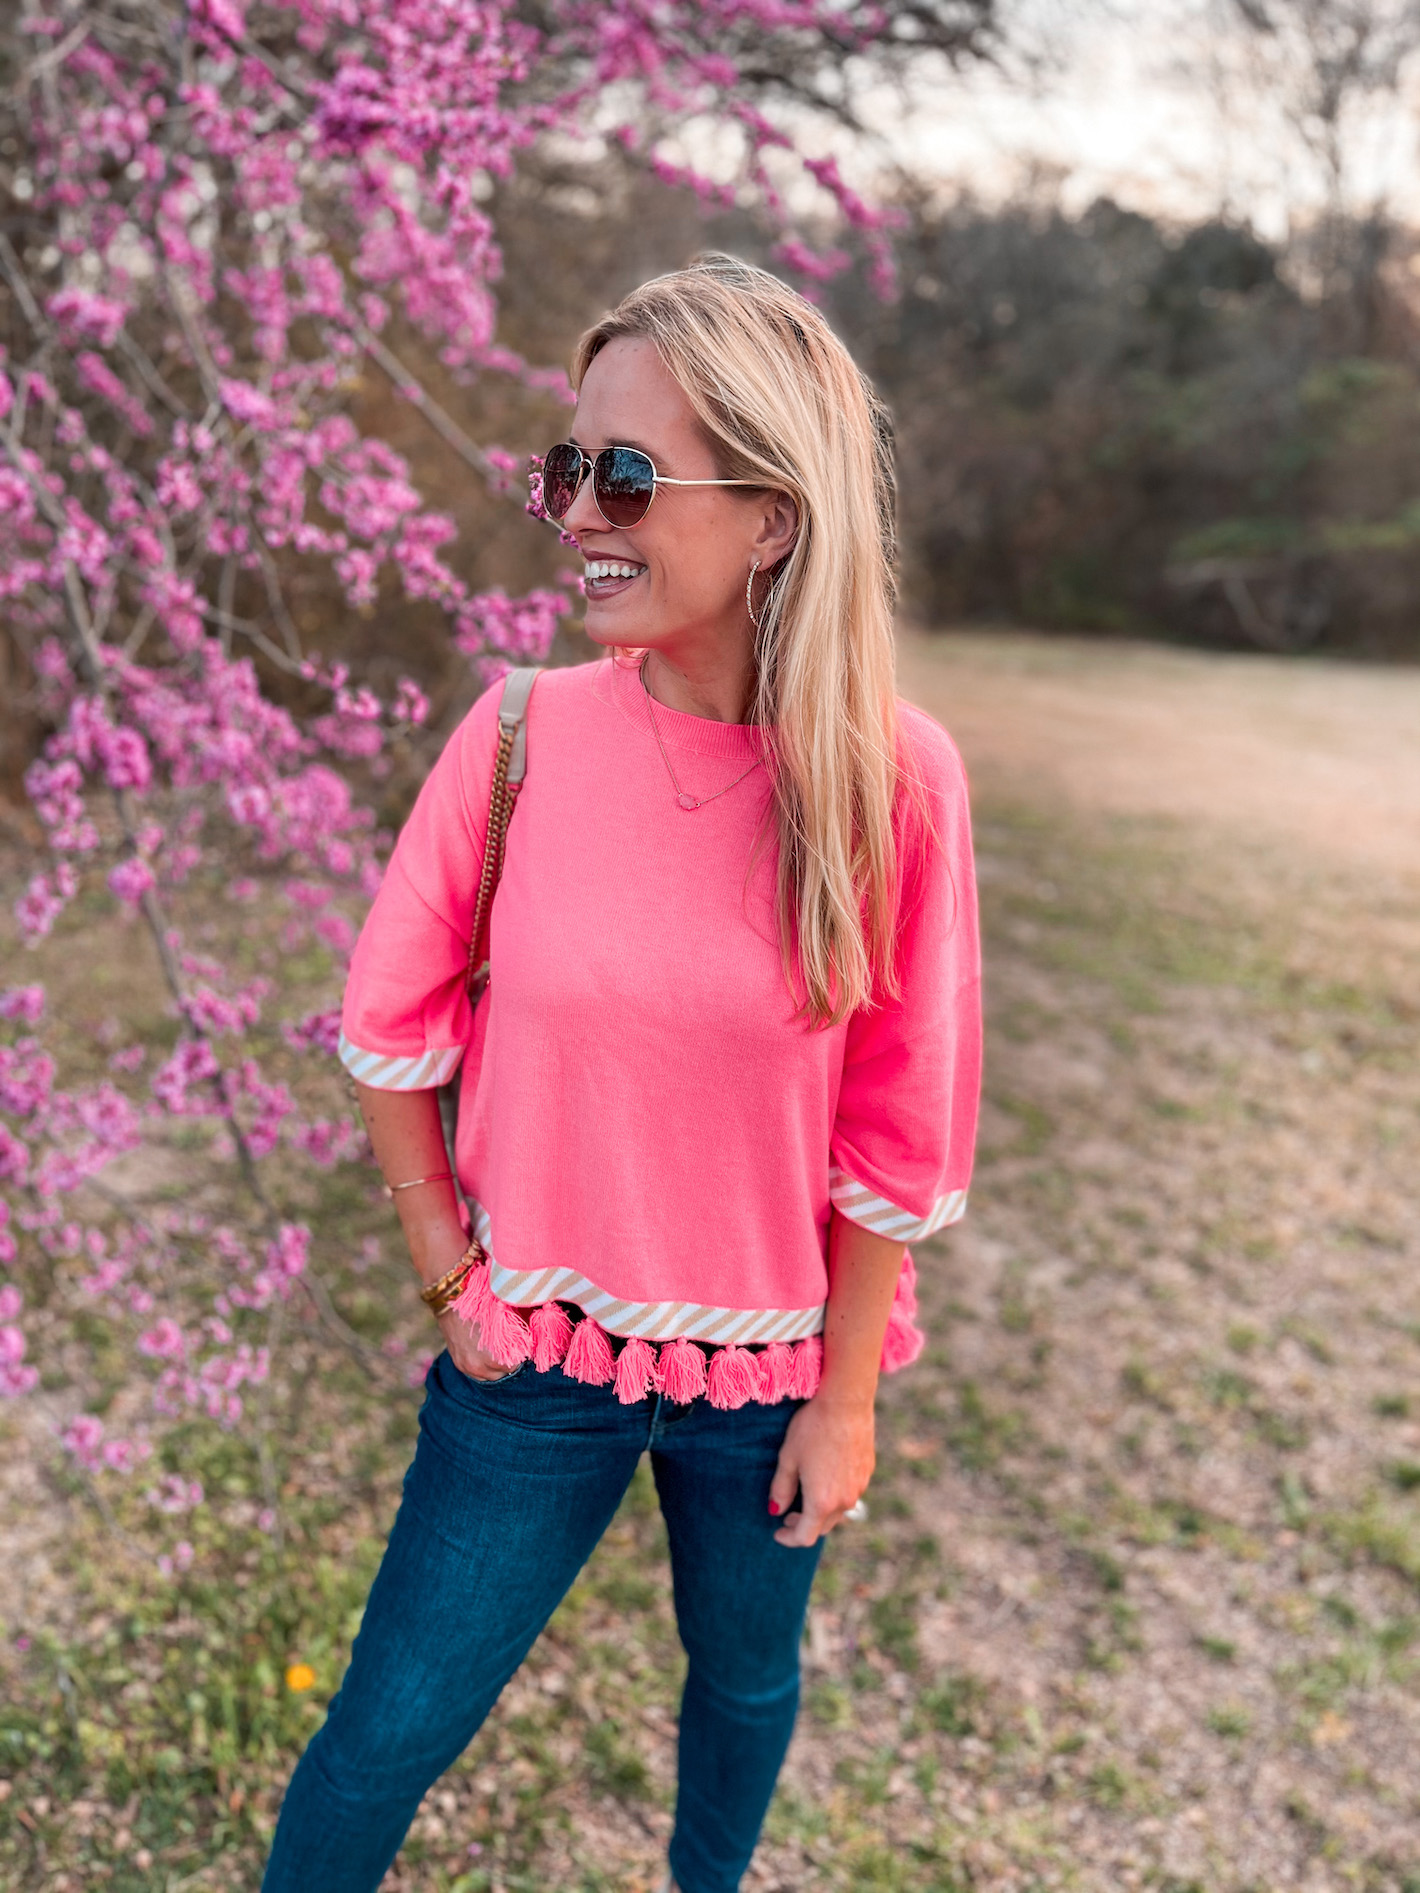 Lilly Pulitzer After Party Sale Summer 2021! Estimate sale date, prices, where you can find Lilly Pulitzer on sale currently, a giveaway and more!